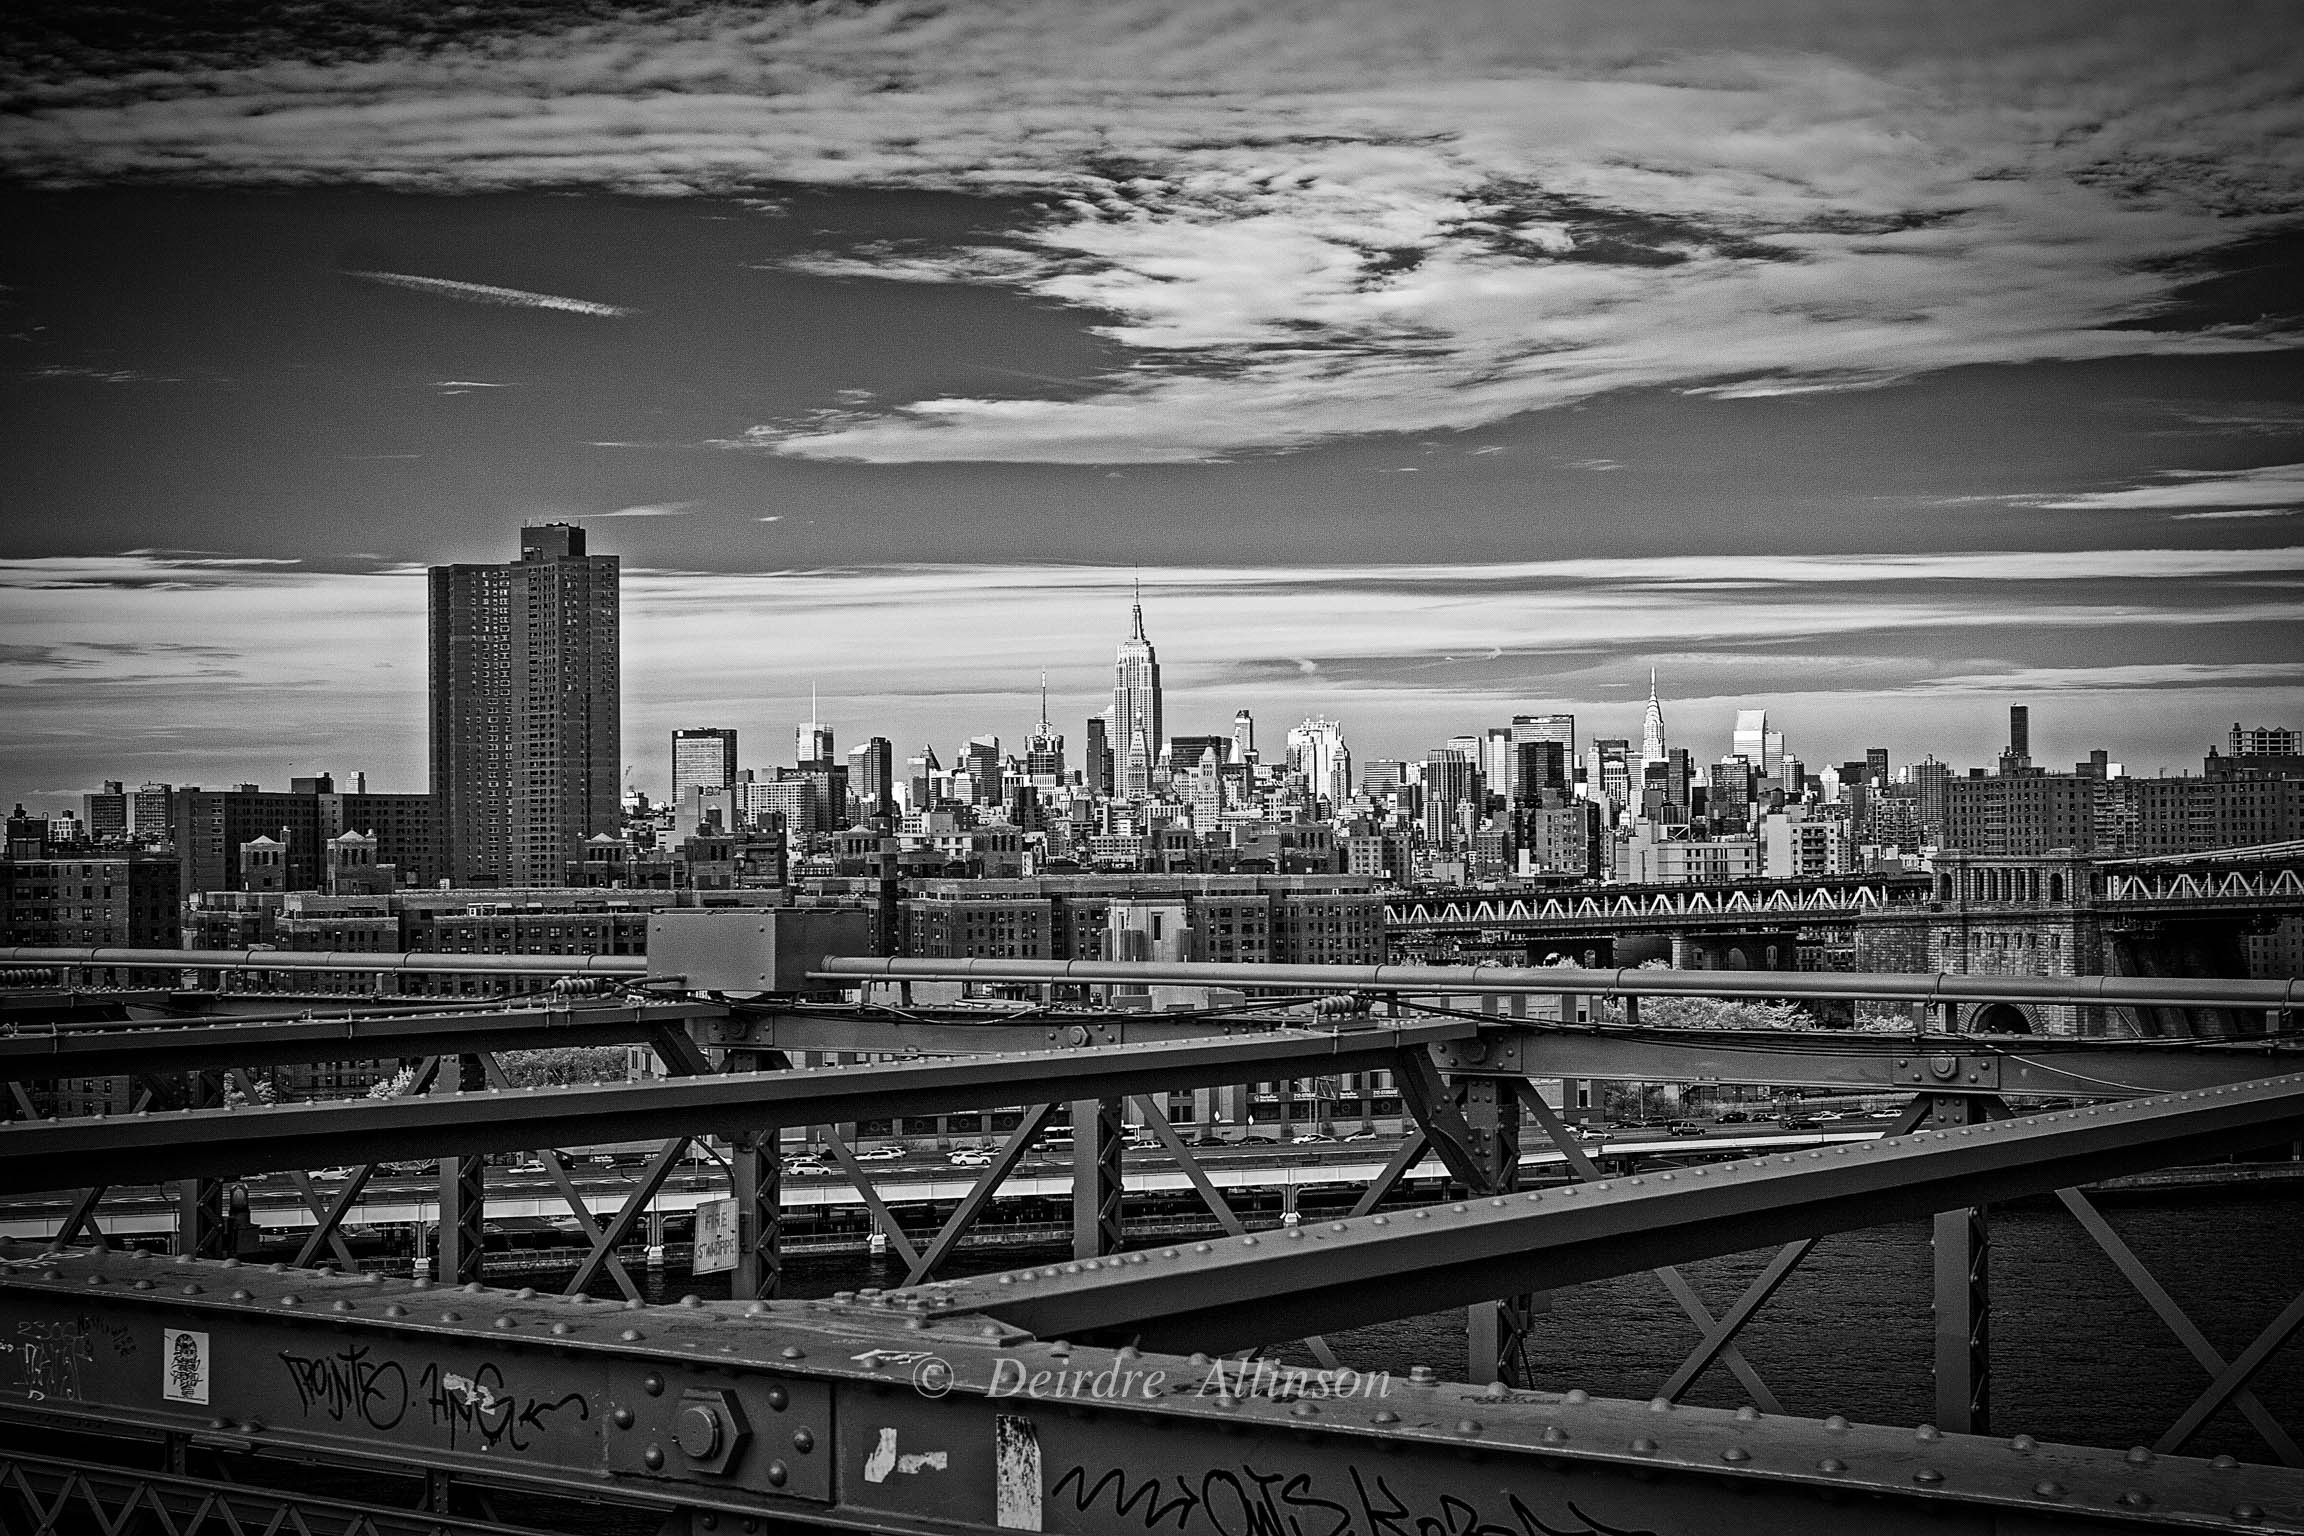 Sky over Manhattan: a View from the Brooklyn Bridge